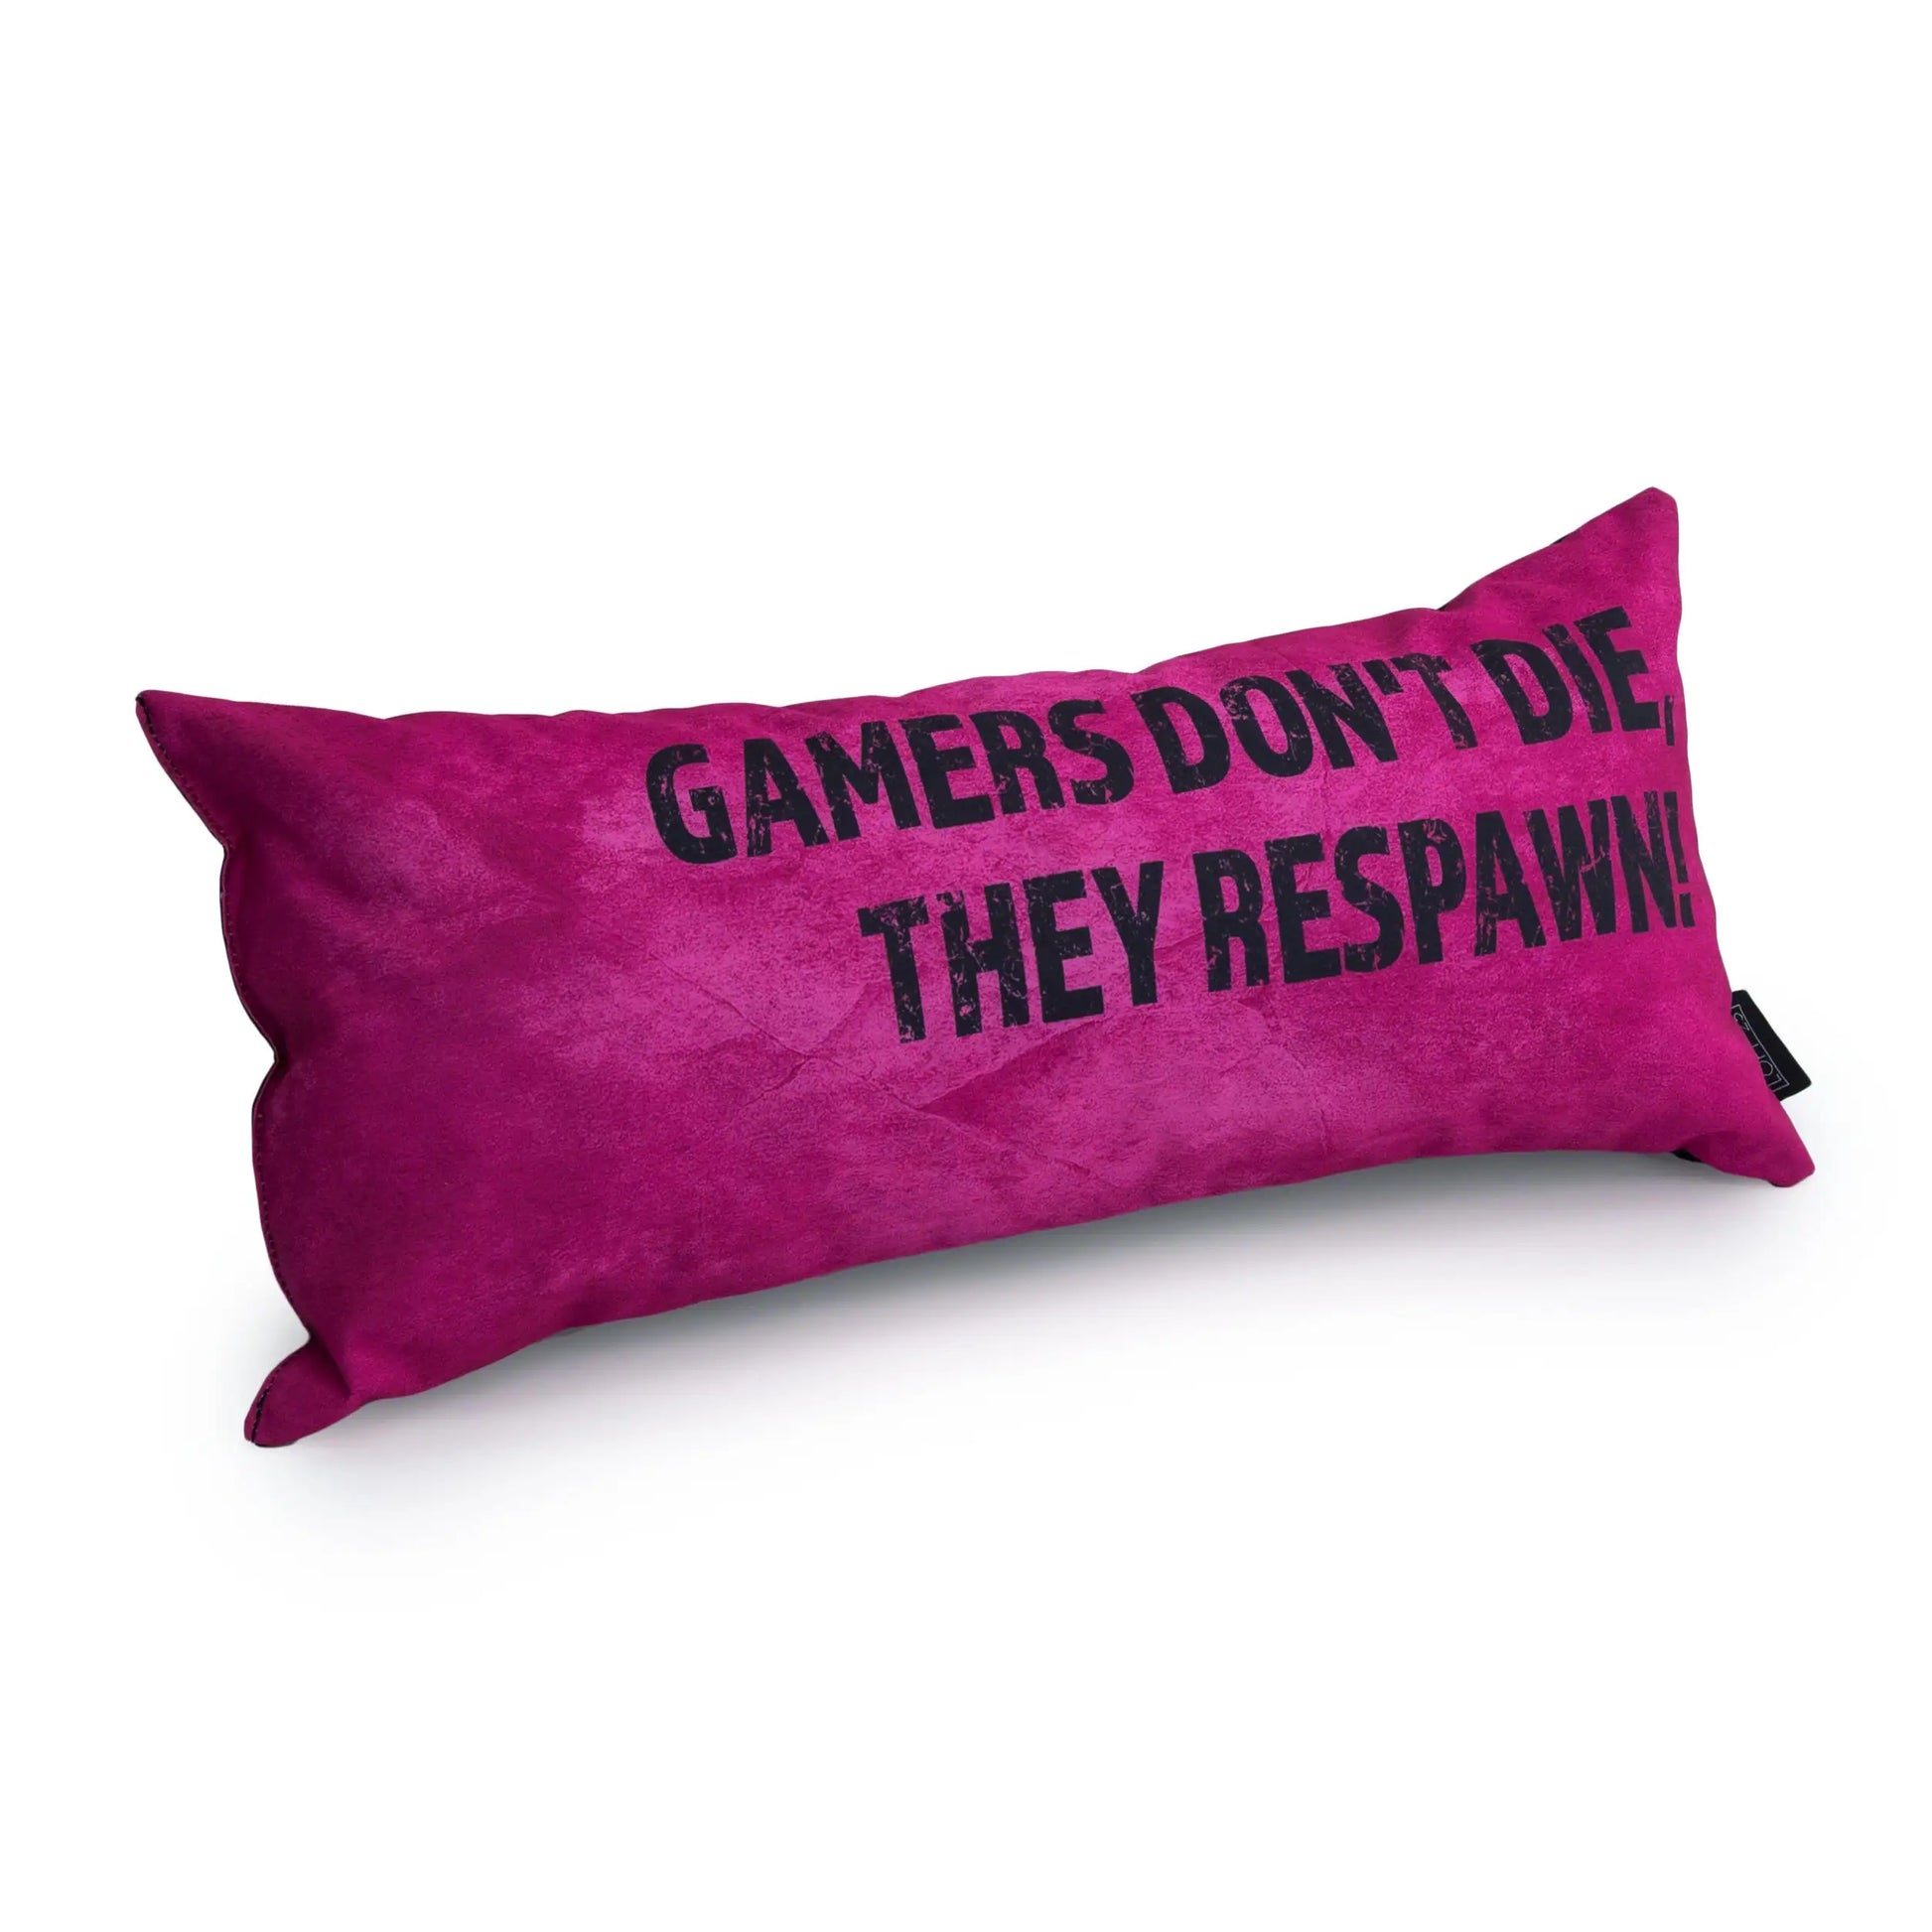 A fluffy pink pillow with the text "Gamers Don't Die, They Respawn!" written on it in white letters. 